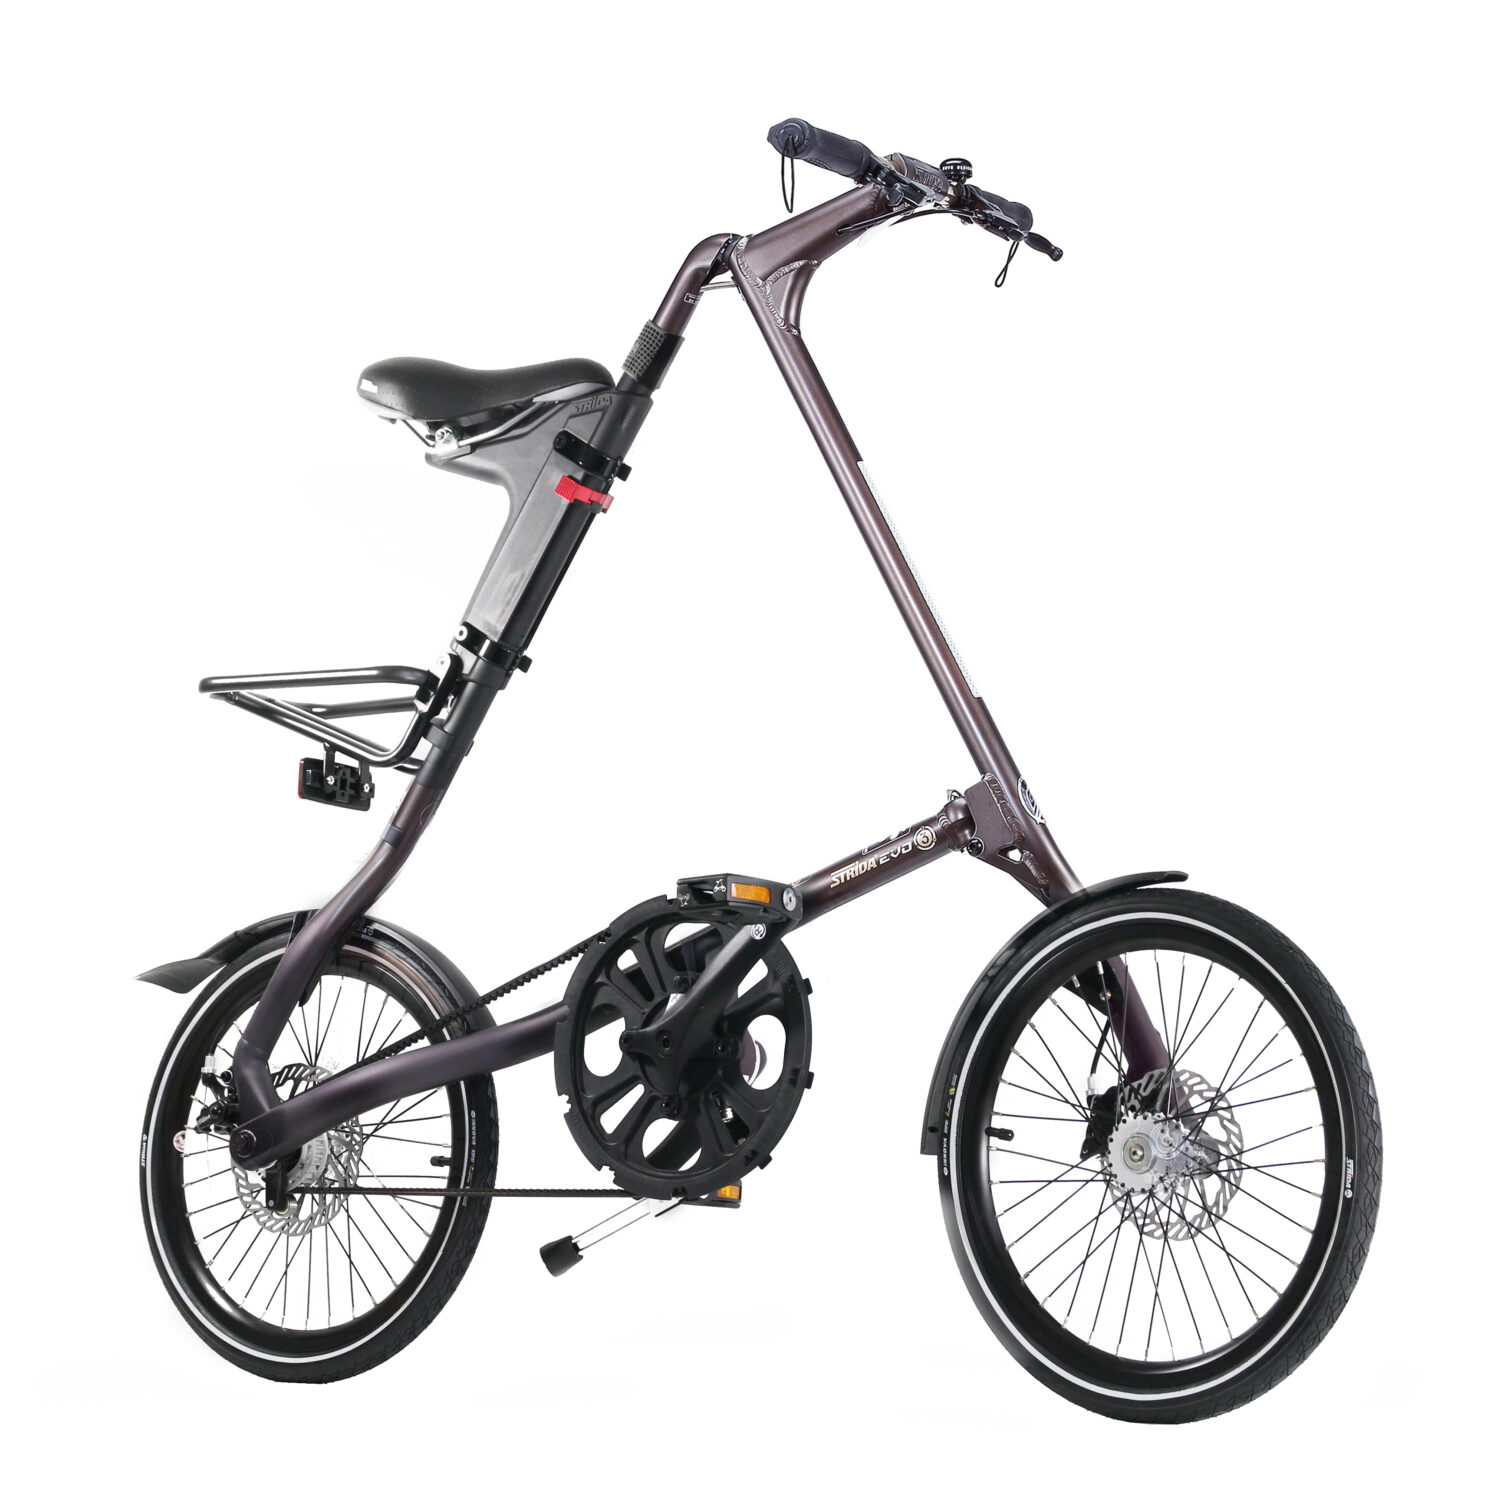 foldable bicycle design